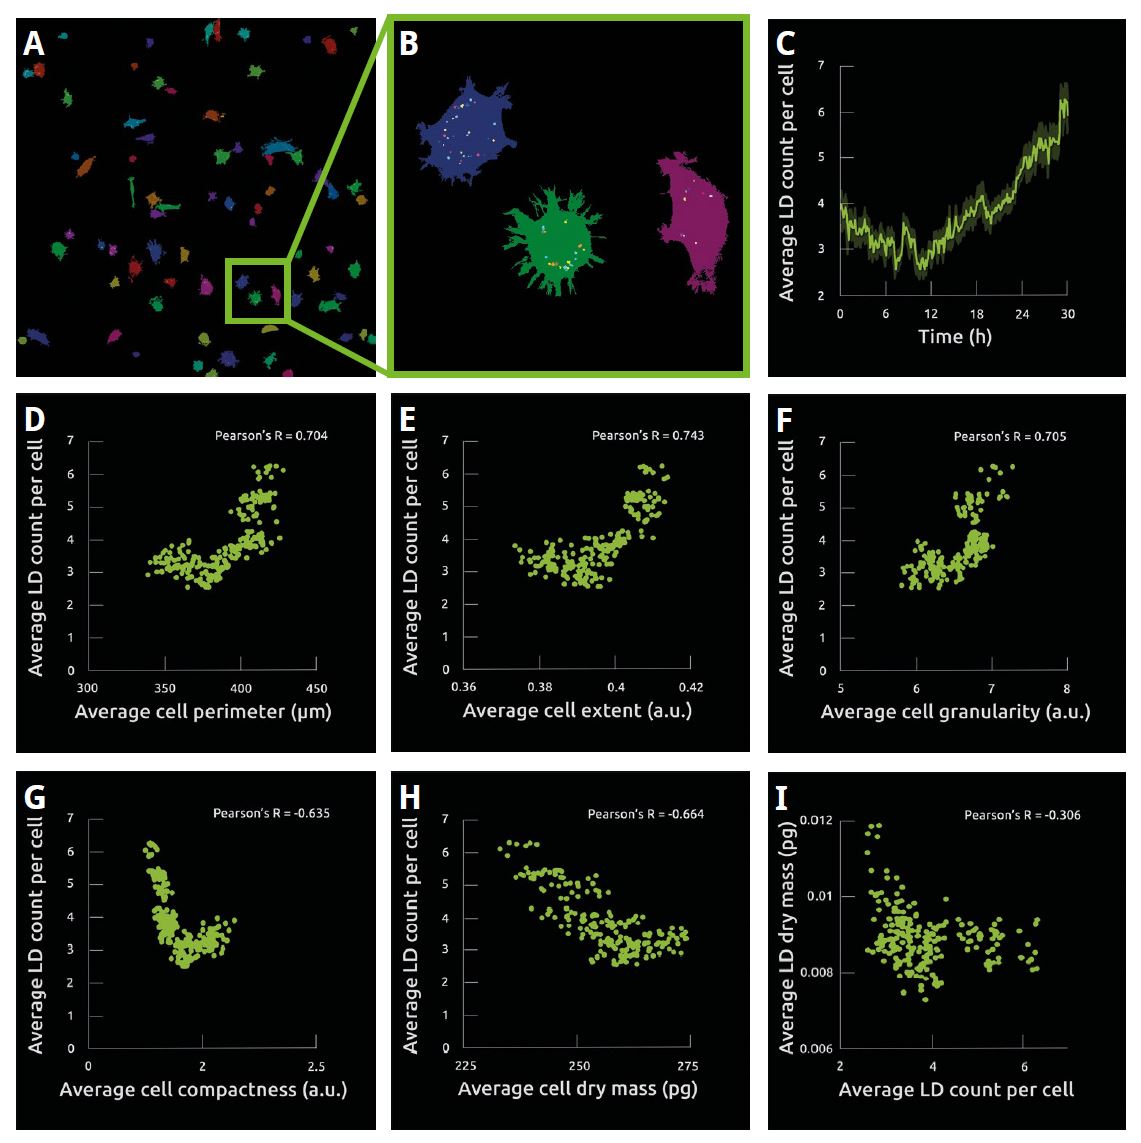 Image 2 - Quantifying LD dynamics at single cell level